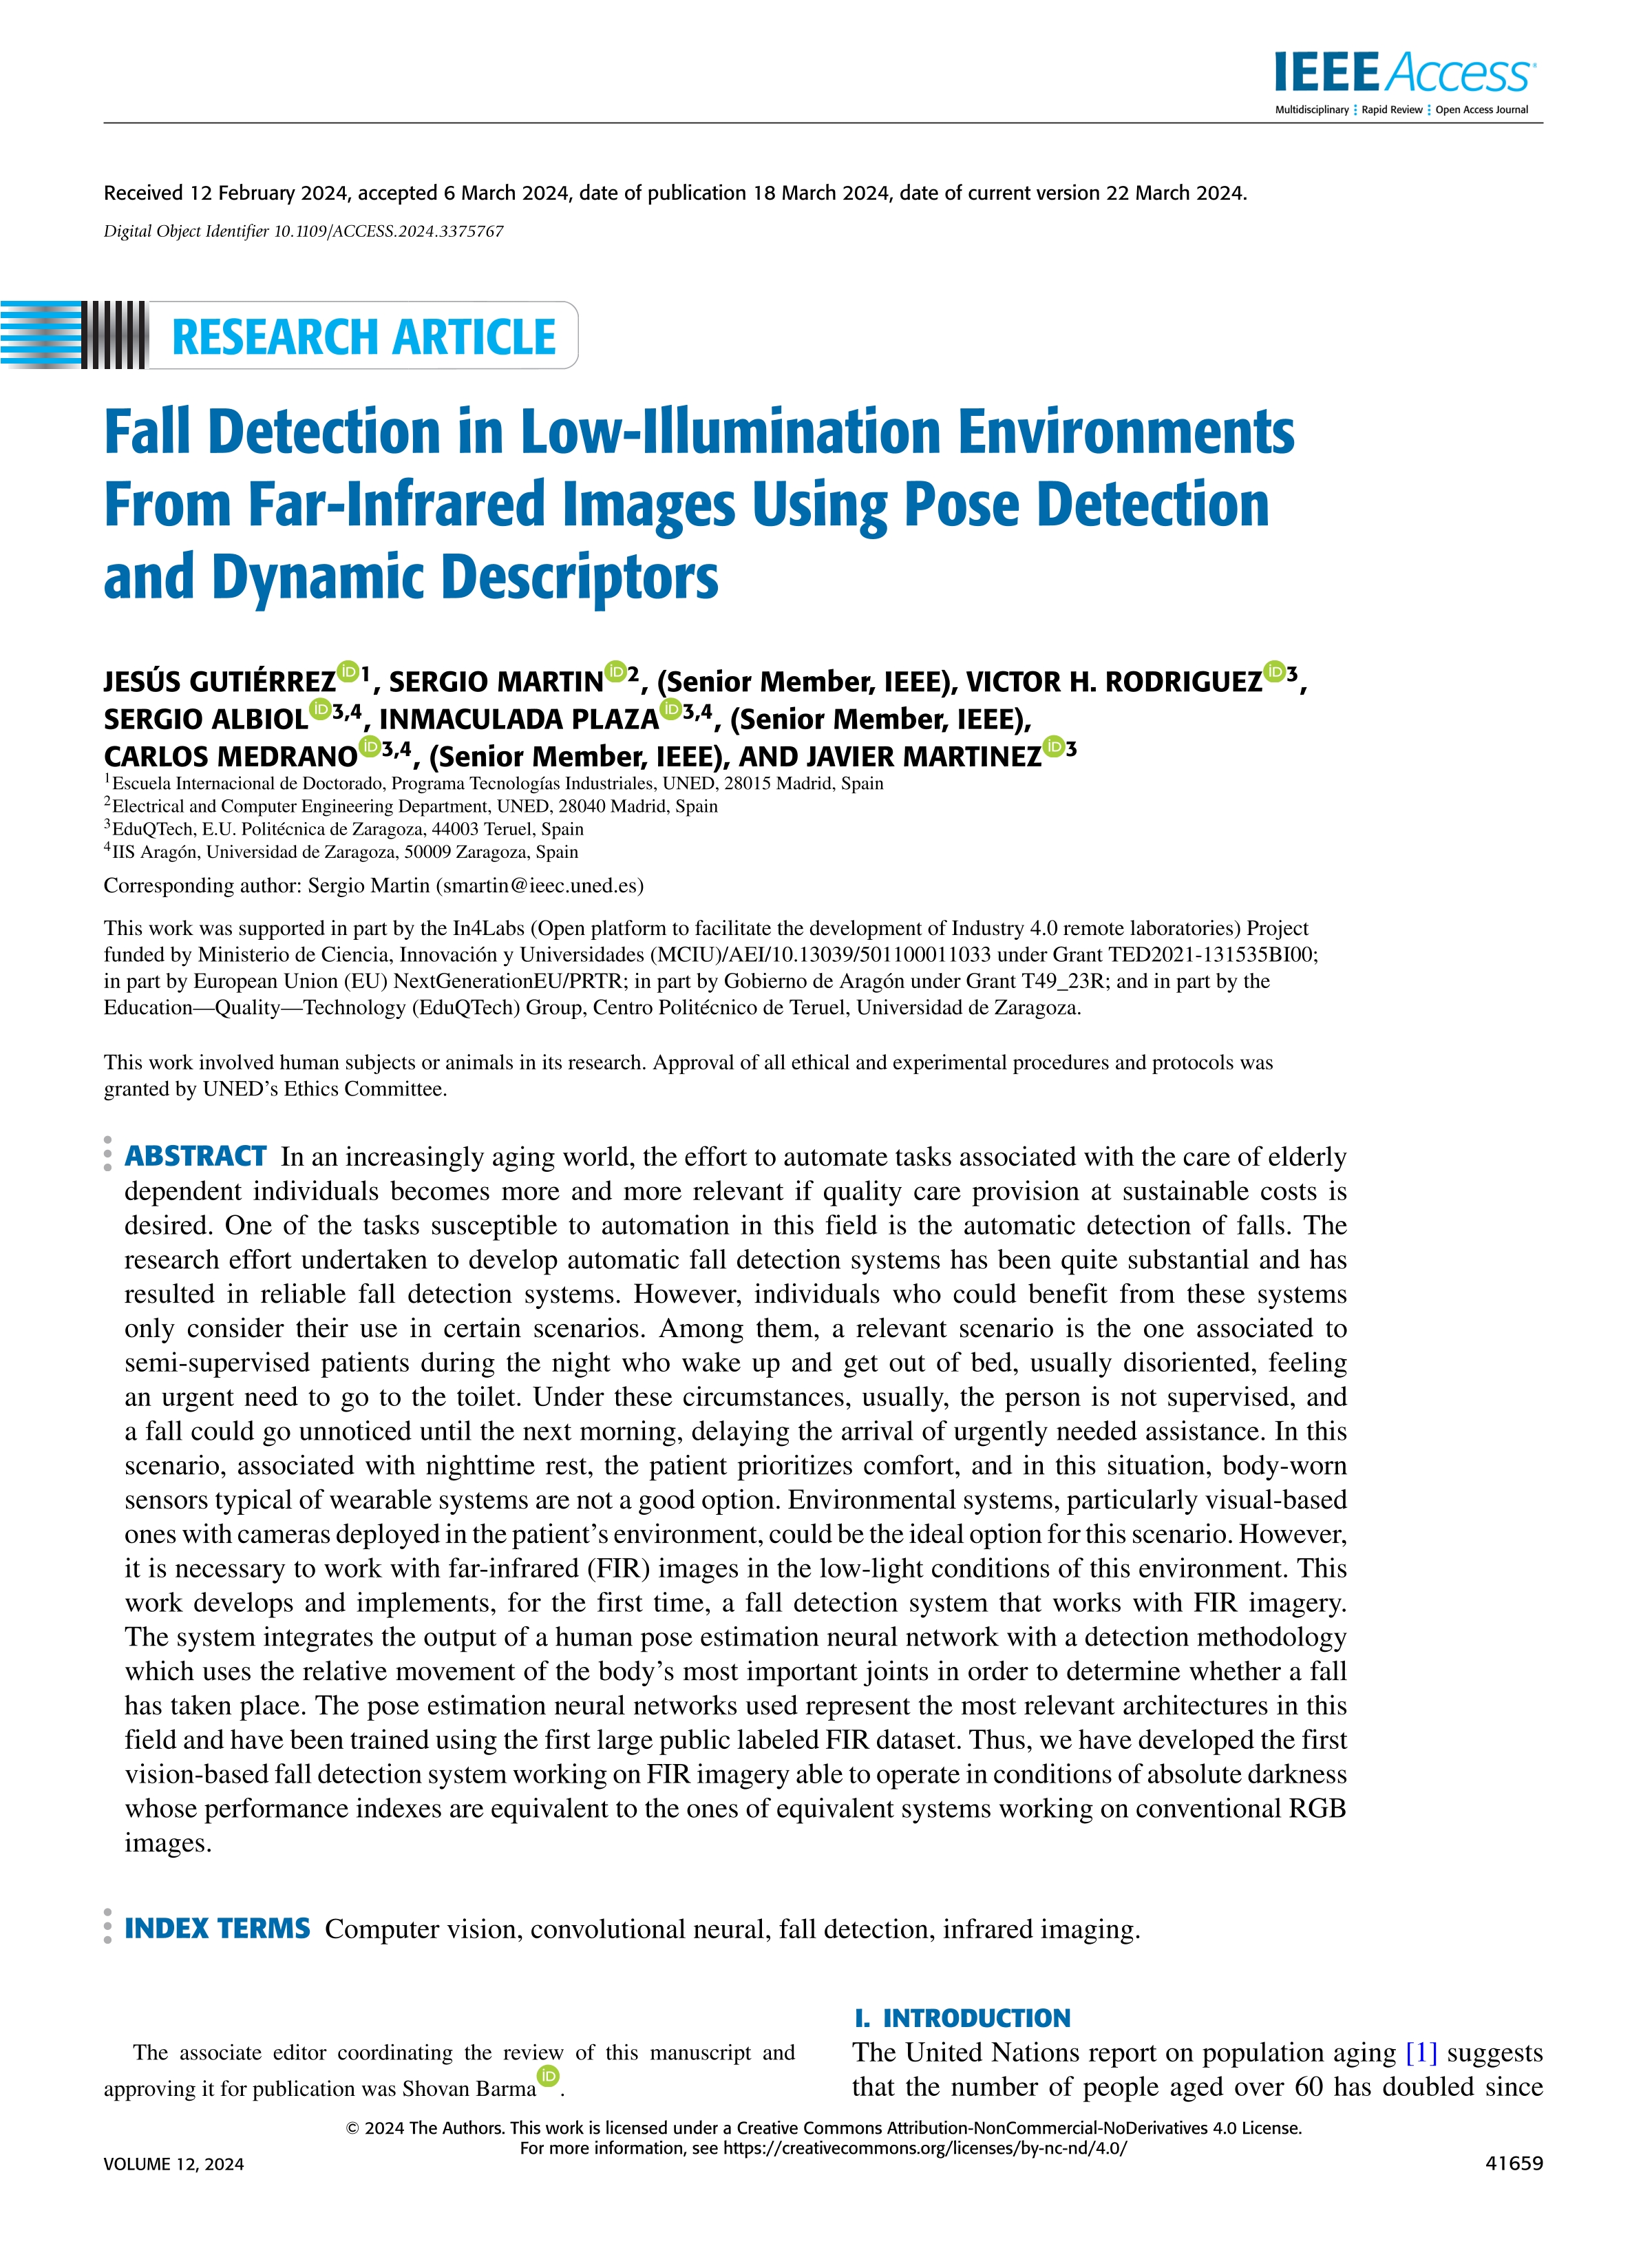 Fall detection in low-illumination environments from far-infrared images using pose detection and dynamic descriptors